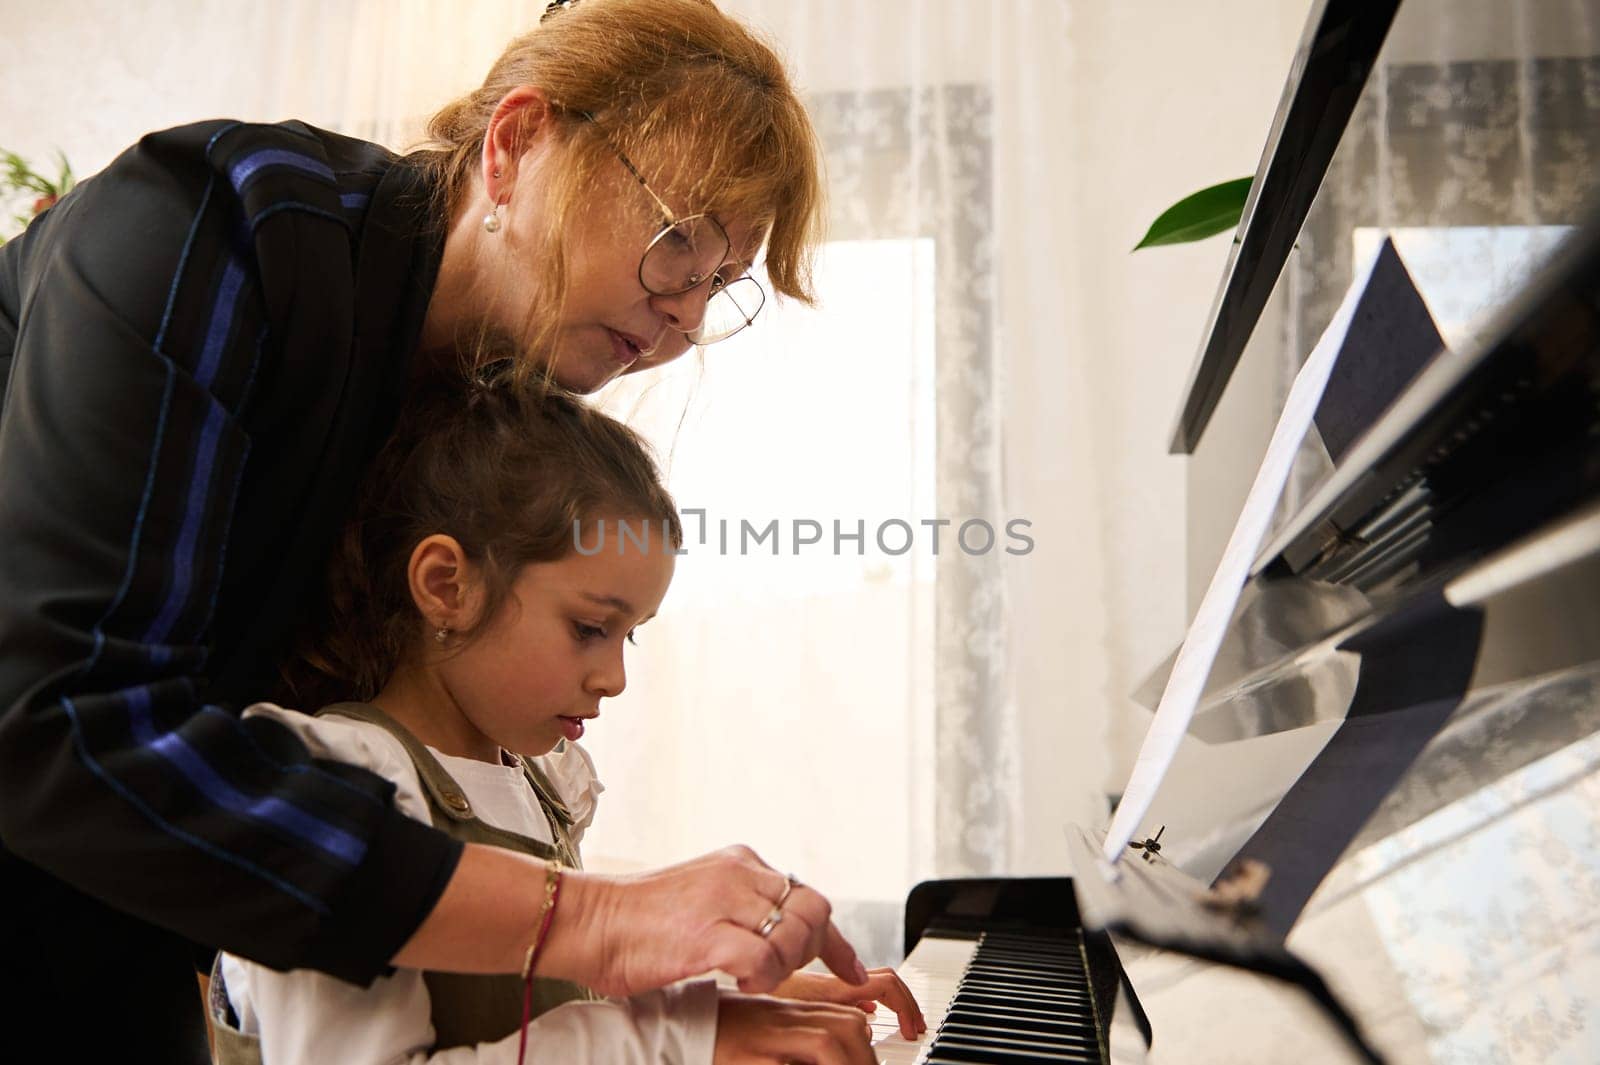 Closeup side view of child girl touching piano keys under the guidance of a musician pianist teacher, explaining playing on grand piano during individual piano lesson